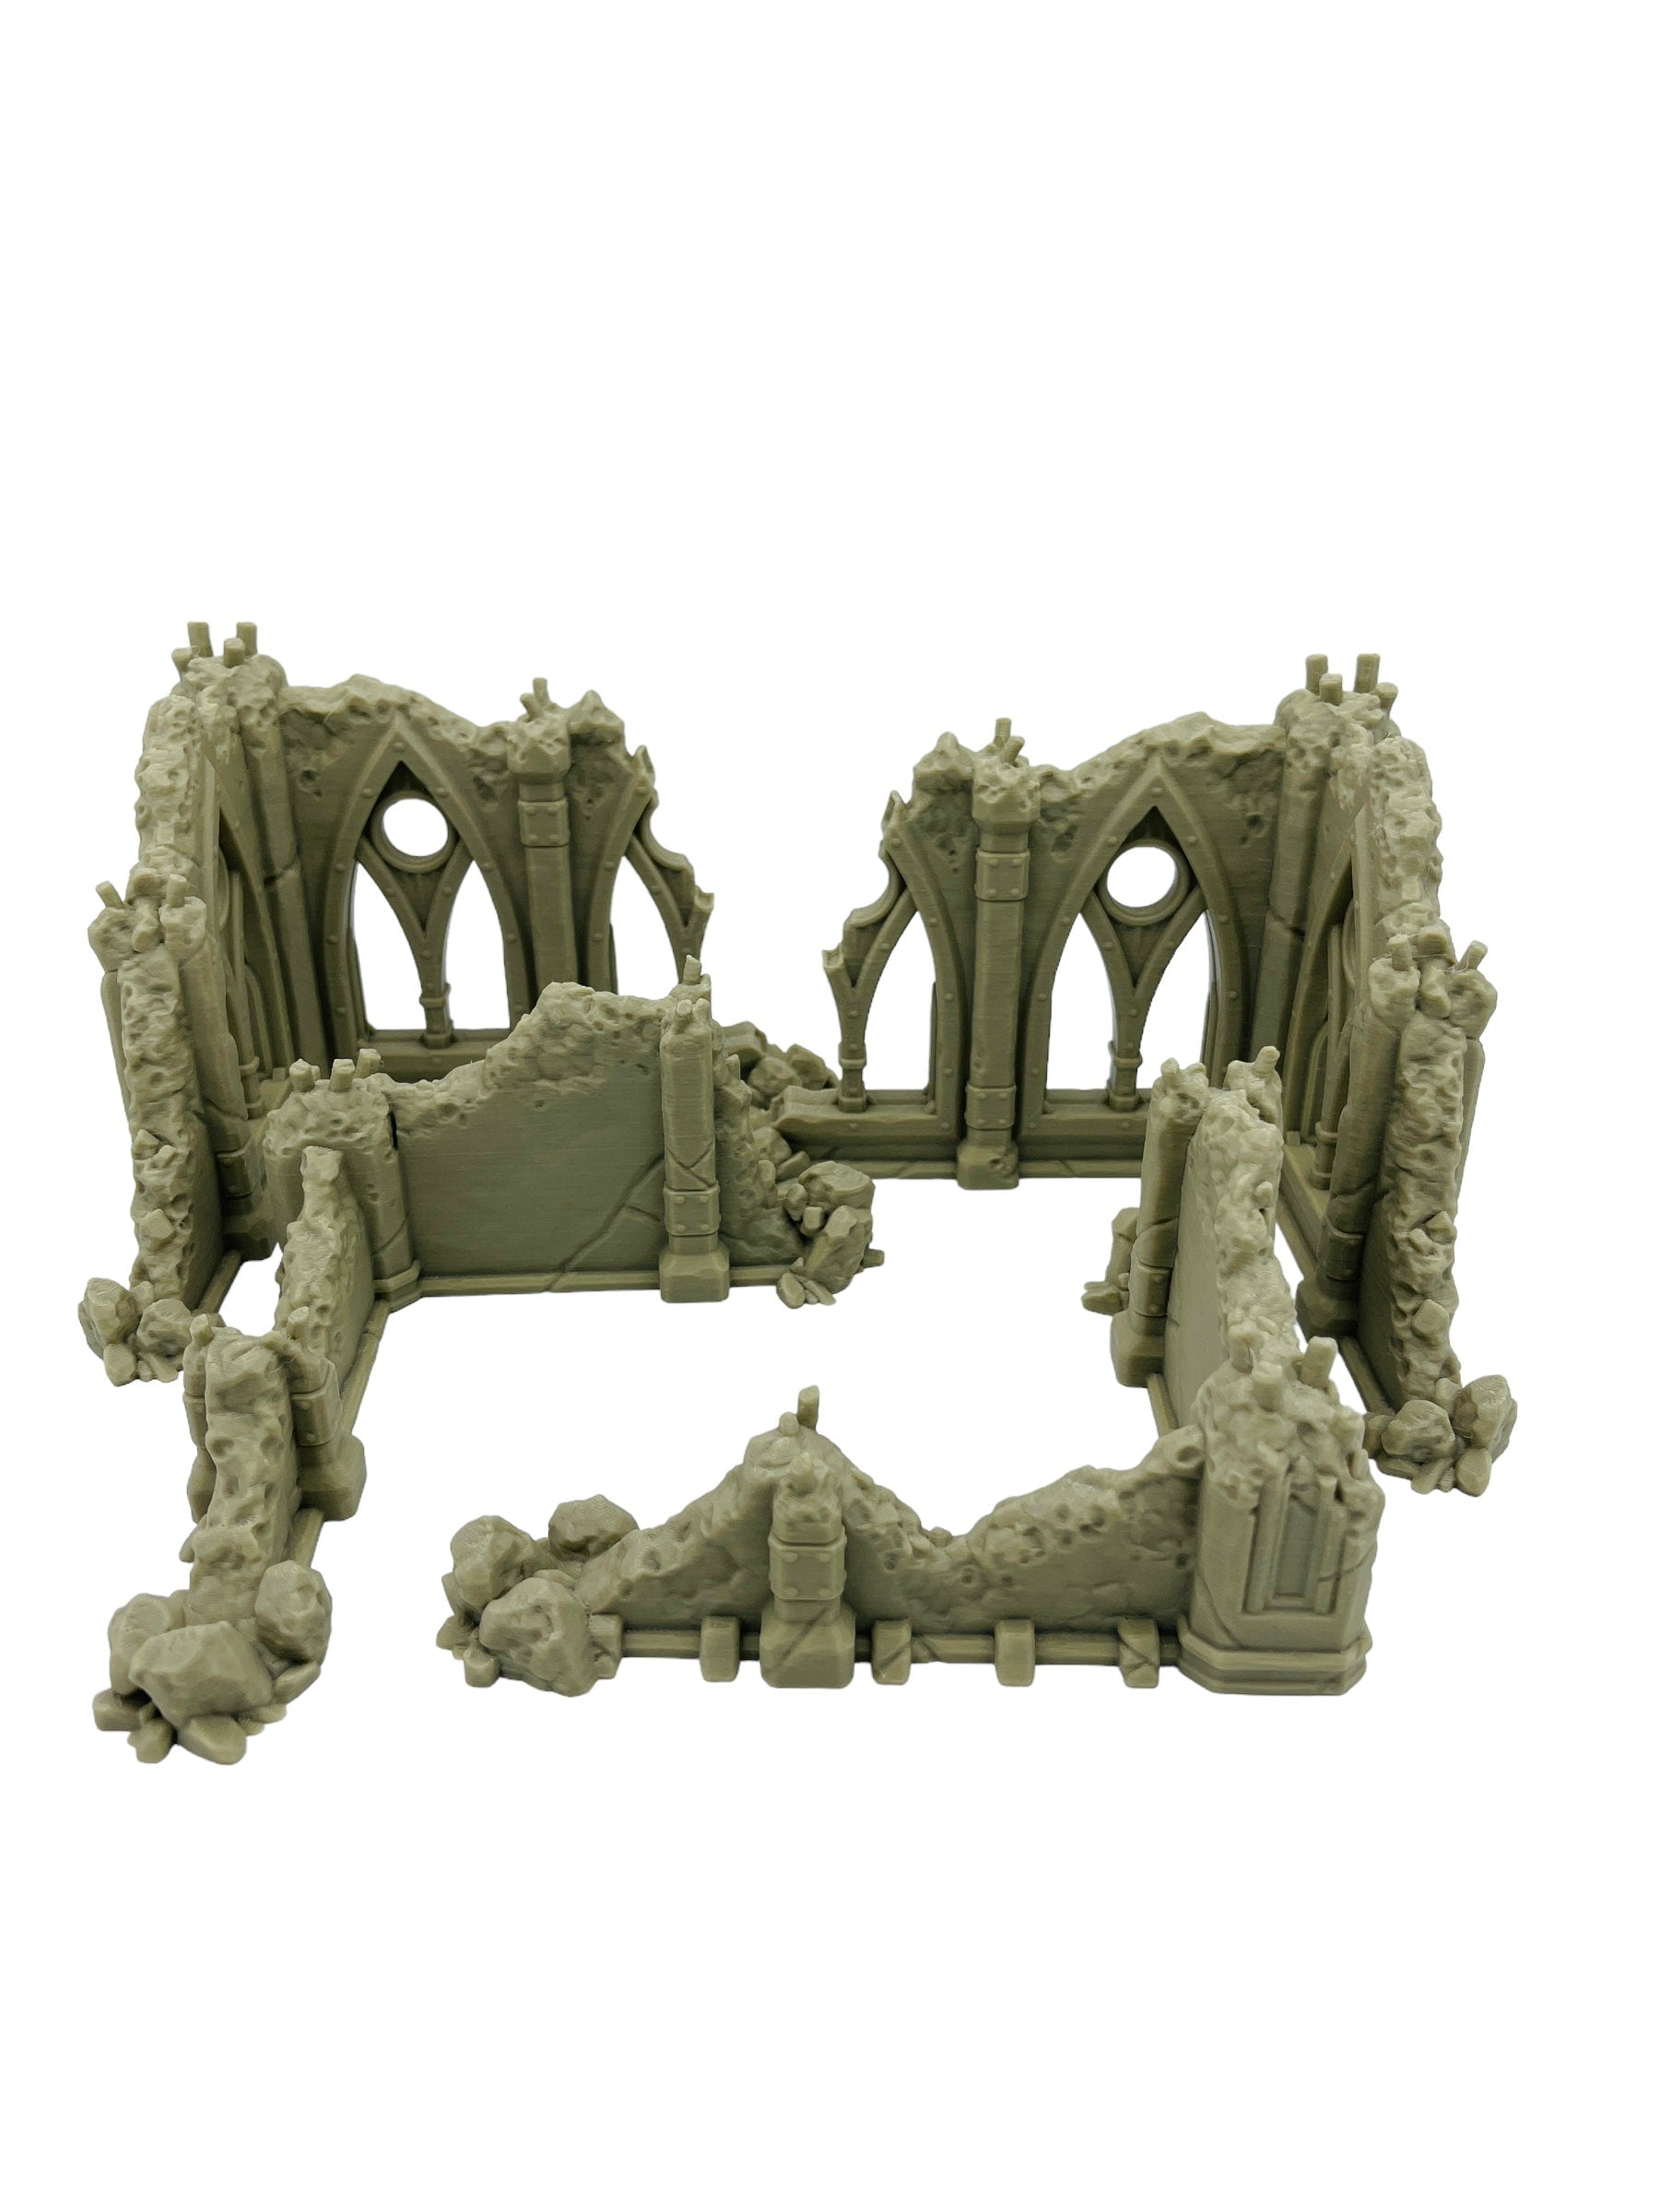 Ruined Ground Scatter Corner Pieces - Ruins of the Empire / Forbidden Prints / RPG and Wargame 3d Printed Terrain / Licensed Printer